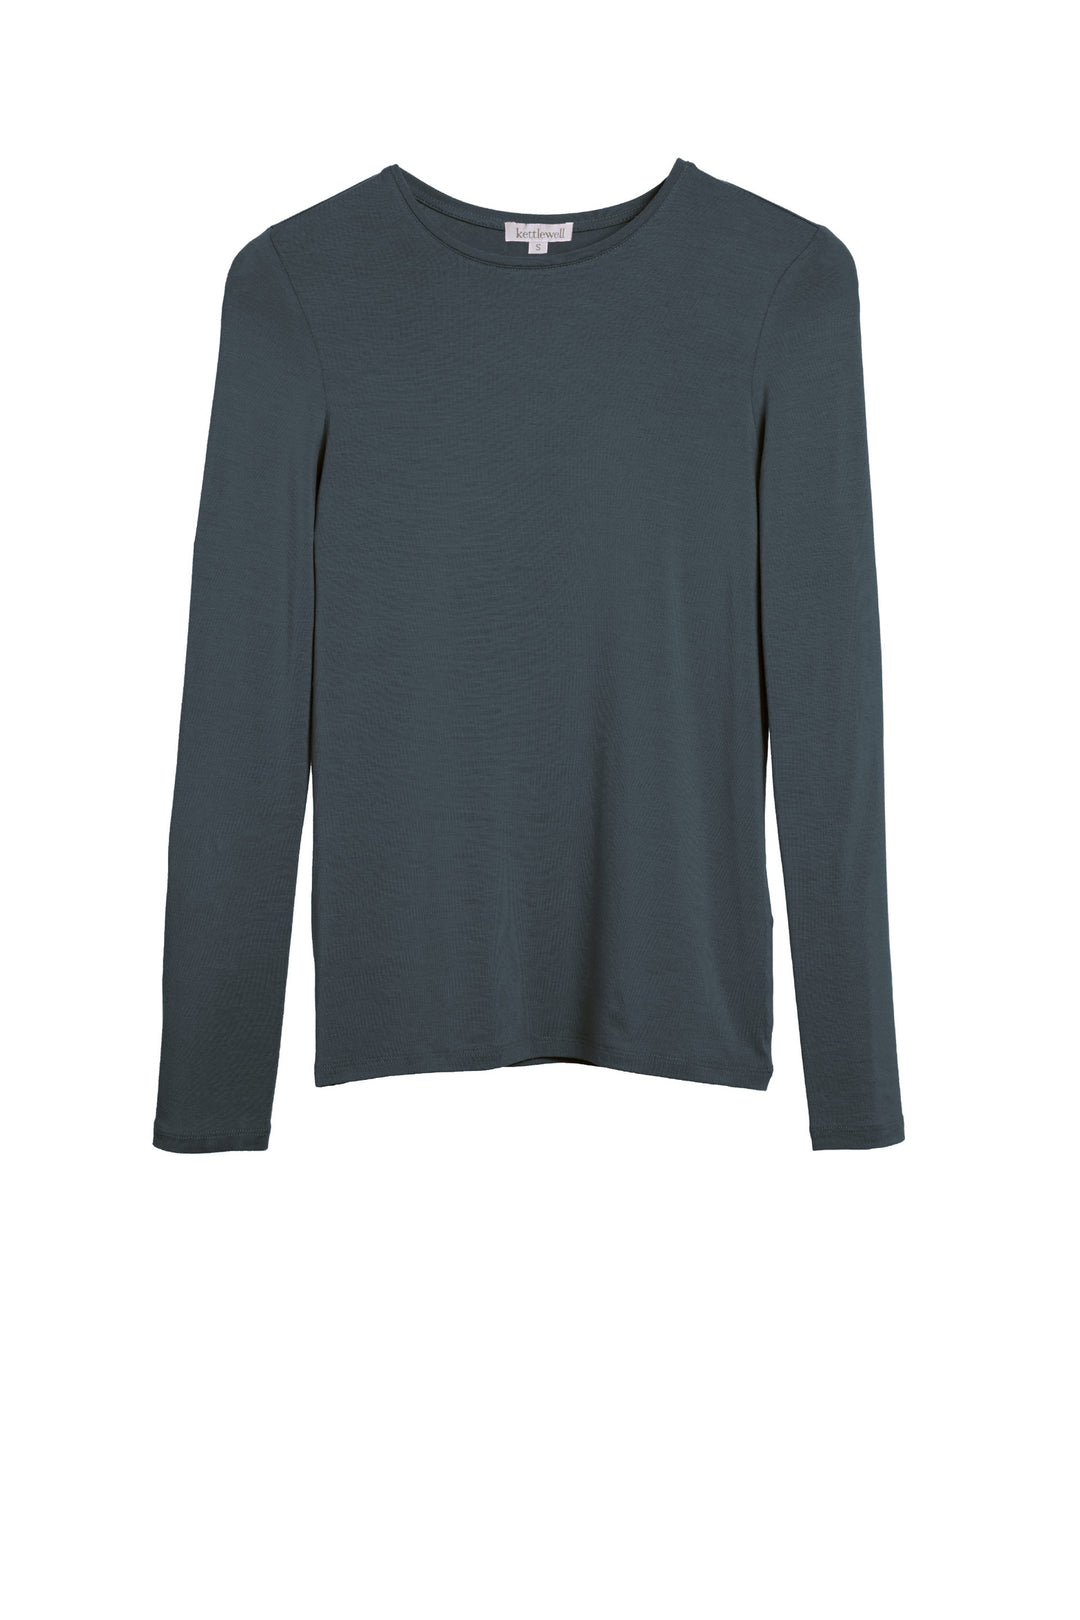 Kettlewell Silky Crew Neck -  Charcoal